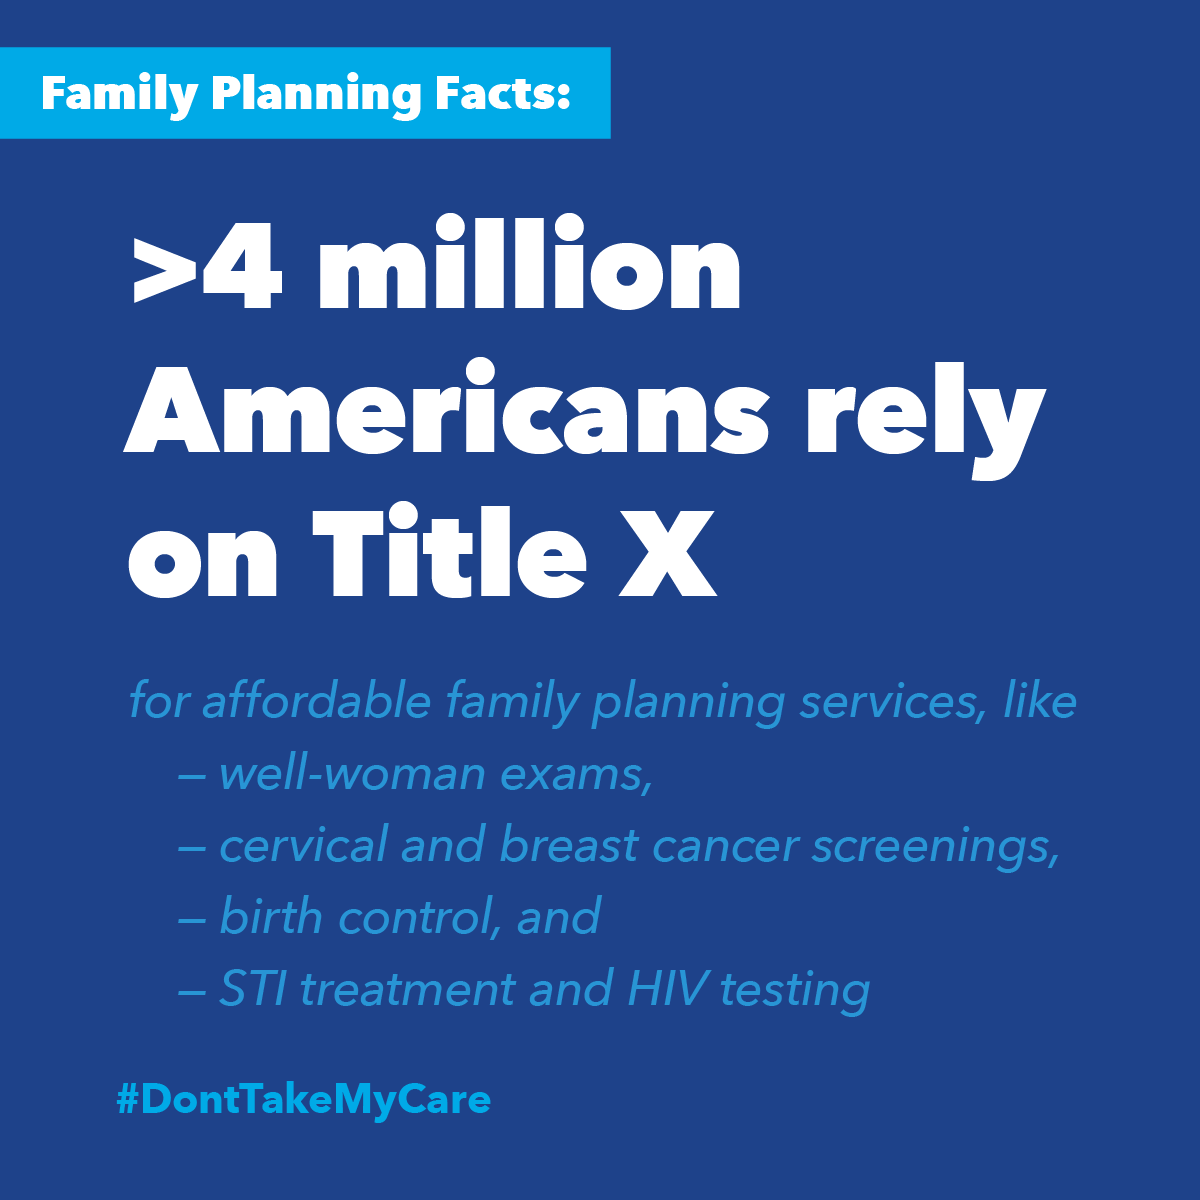 Over 4 million people rely on Title X.